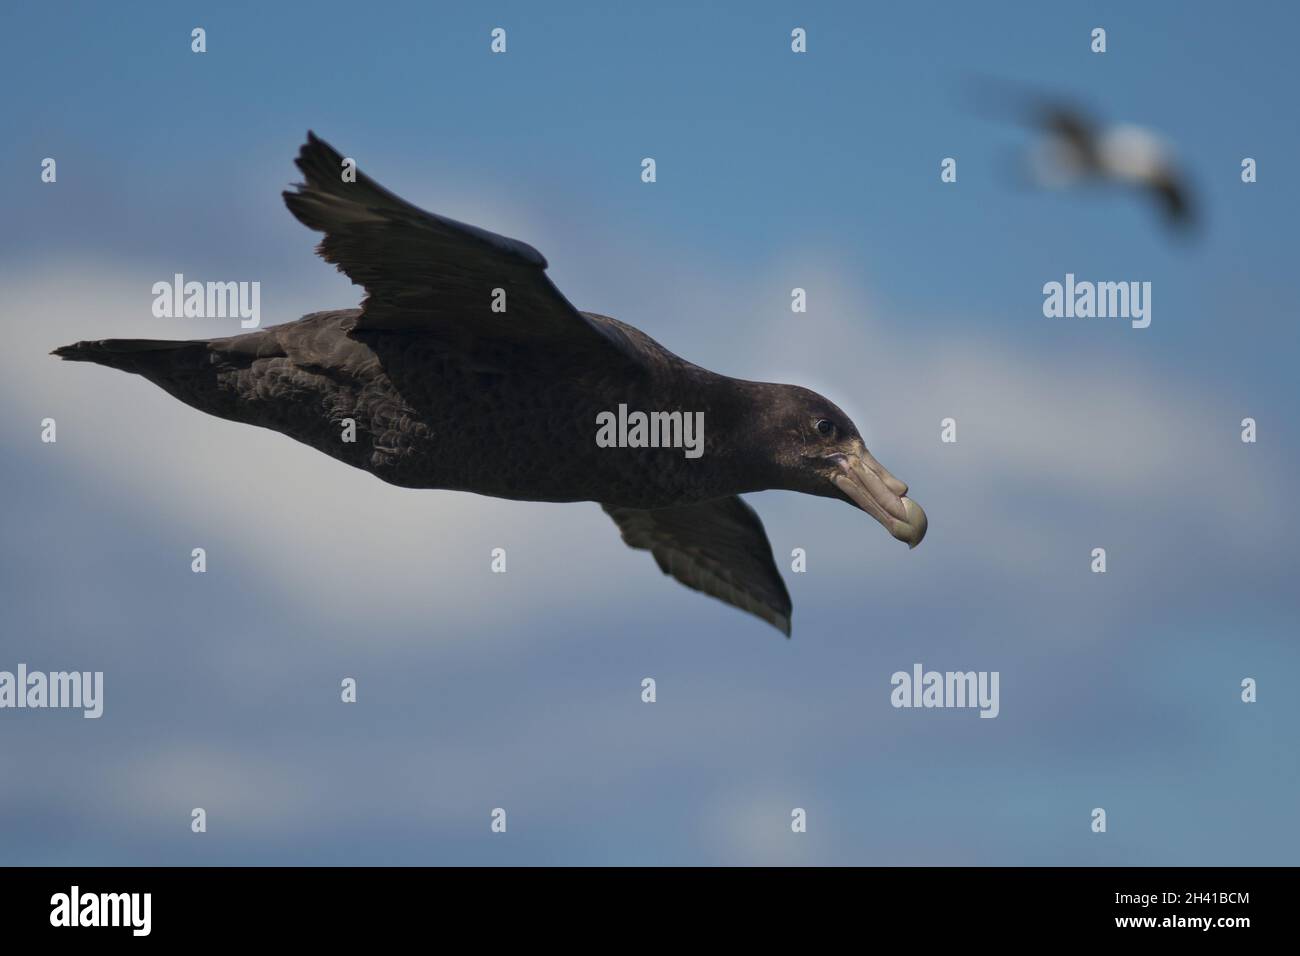 Southern Giant Petrel flying Stock Photo